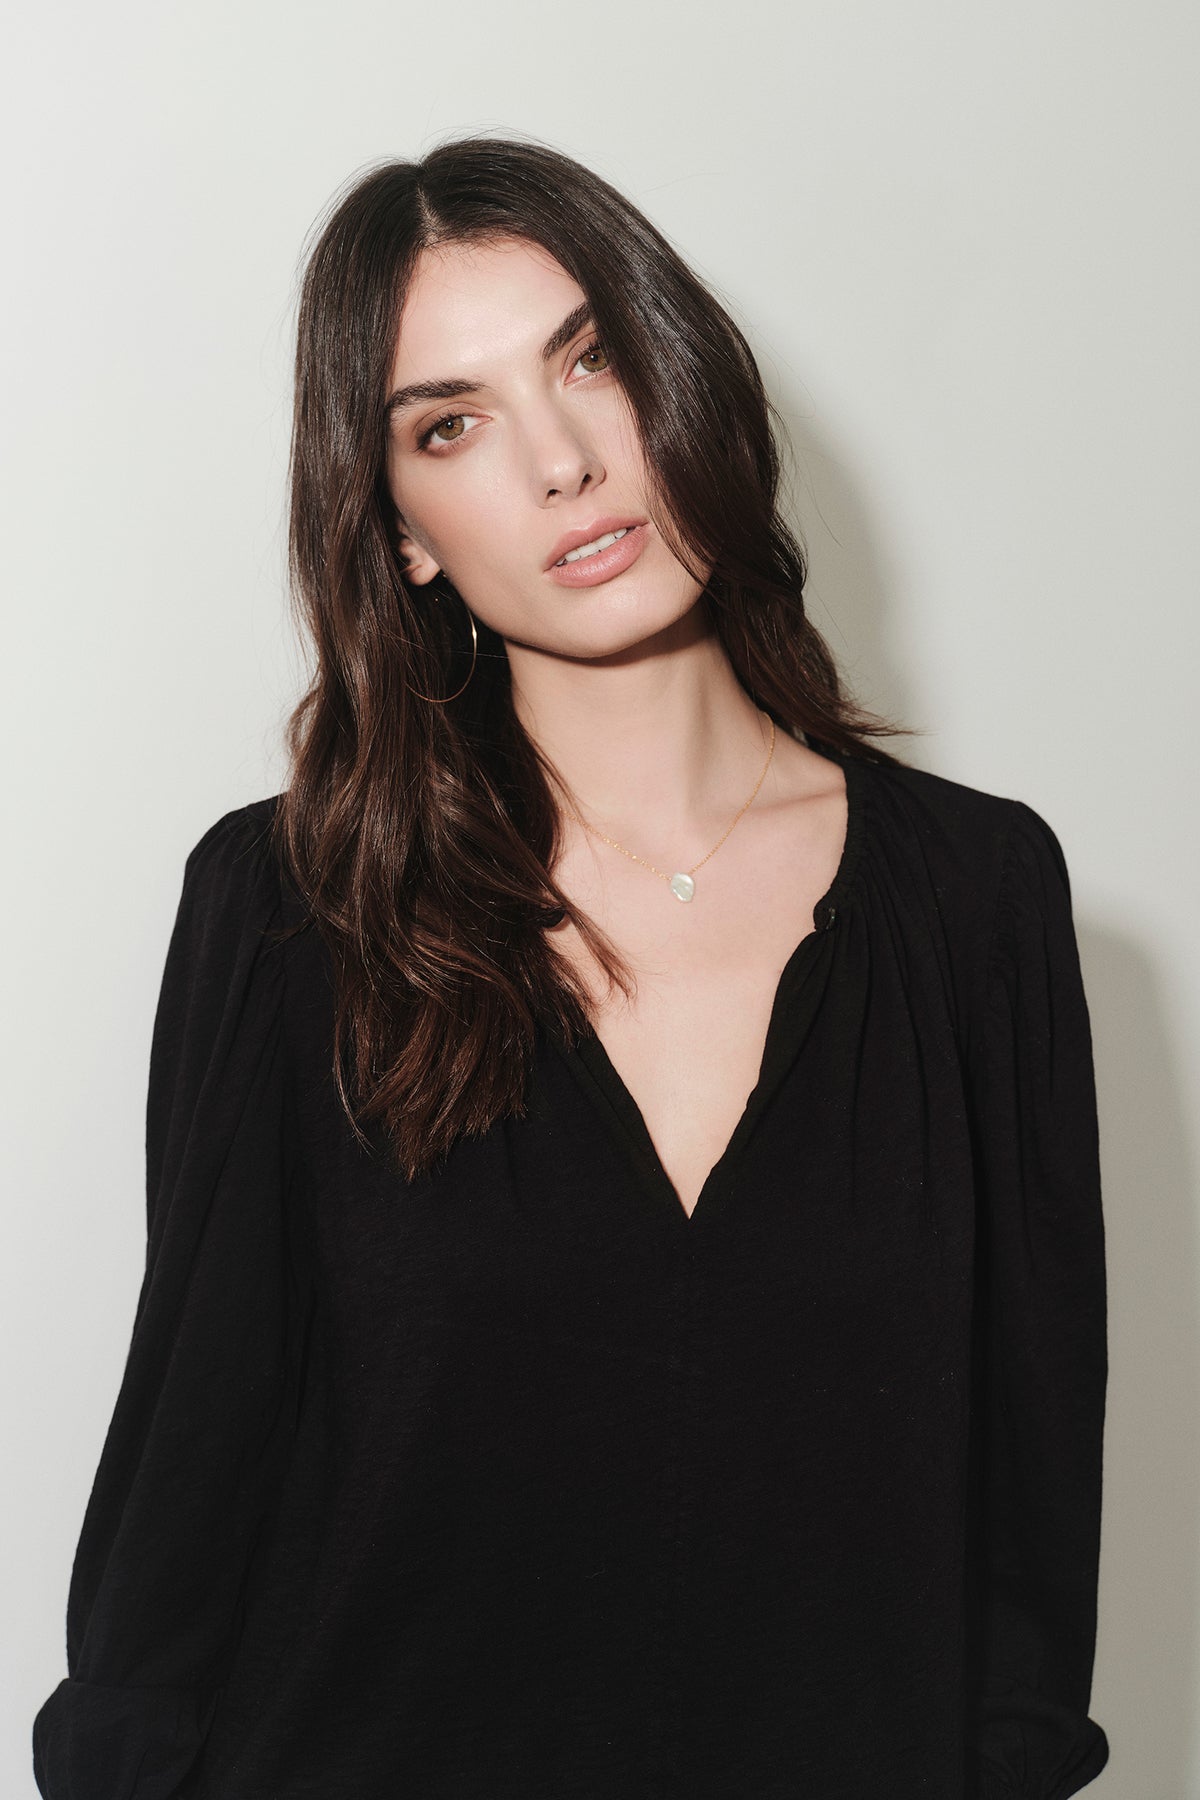 A woman in a black top, the IRINA SPLIT NECK TEE by Velvet by Graham & Spencer, posing for a photo.-26883564830913